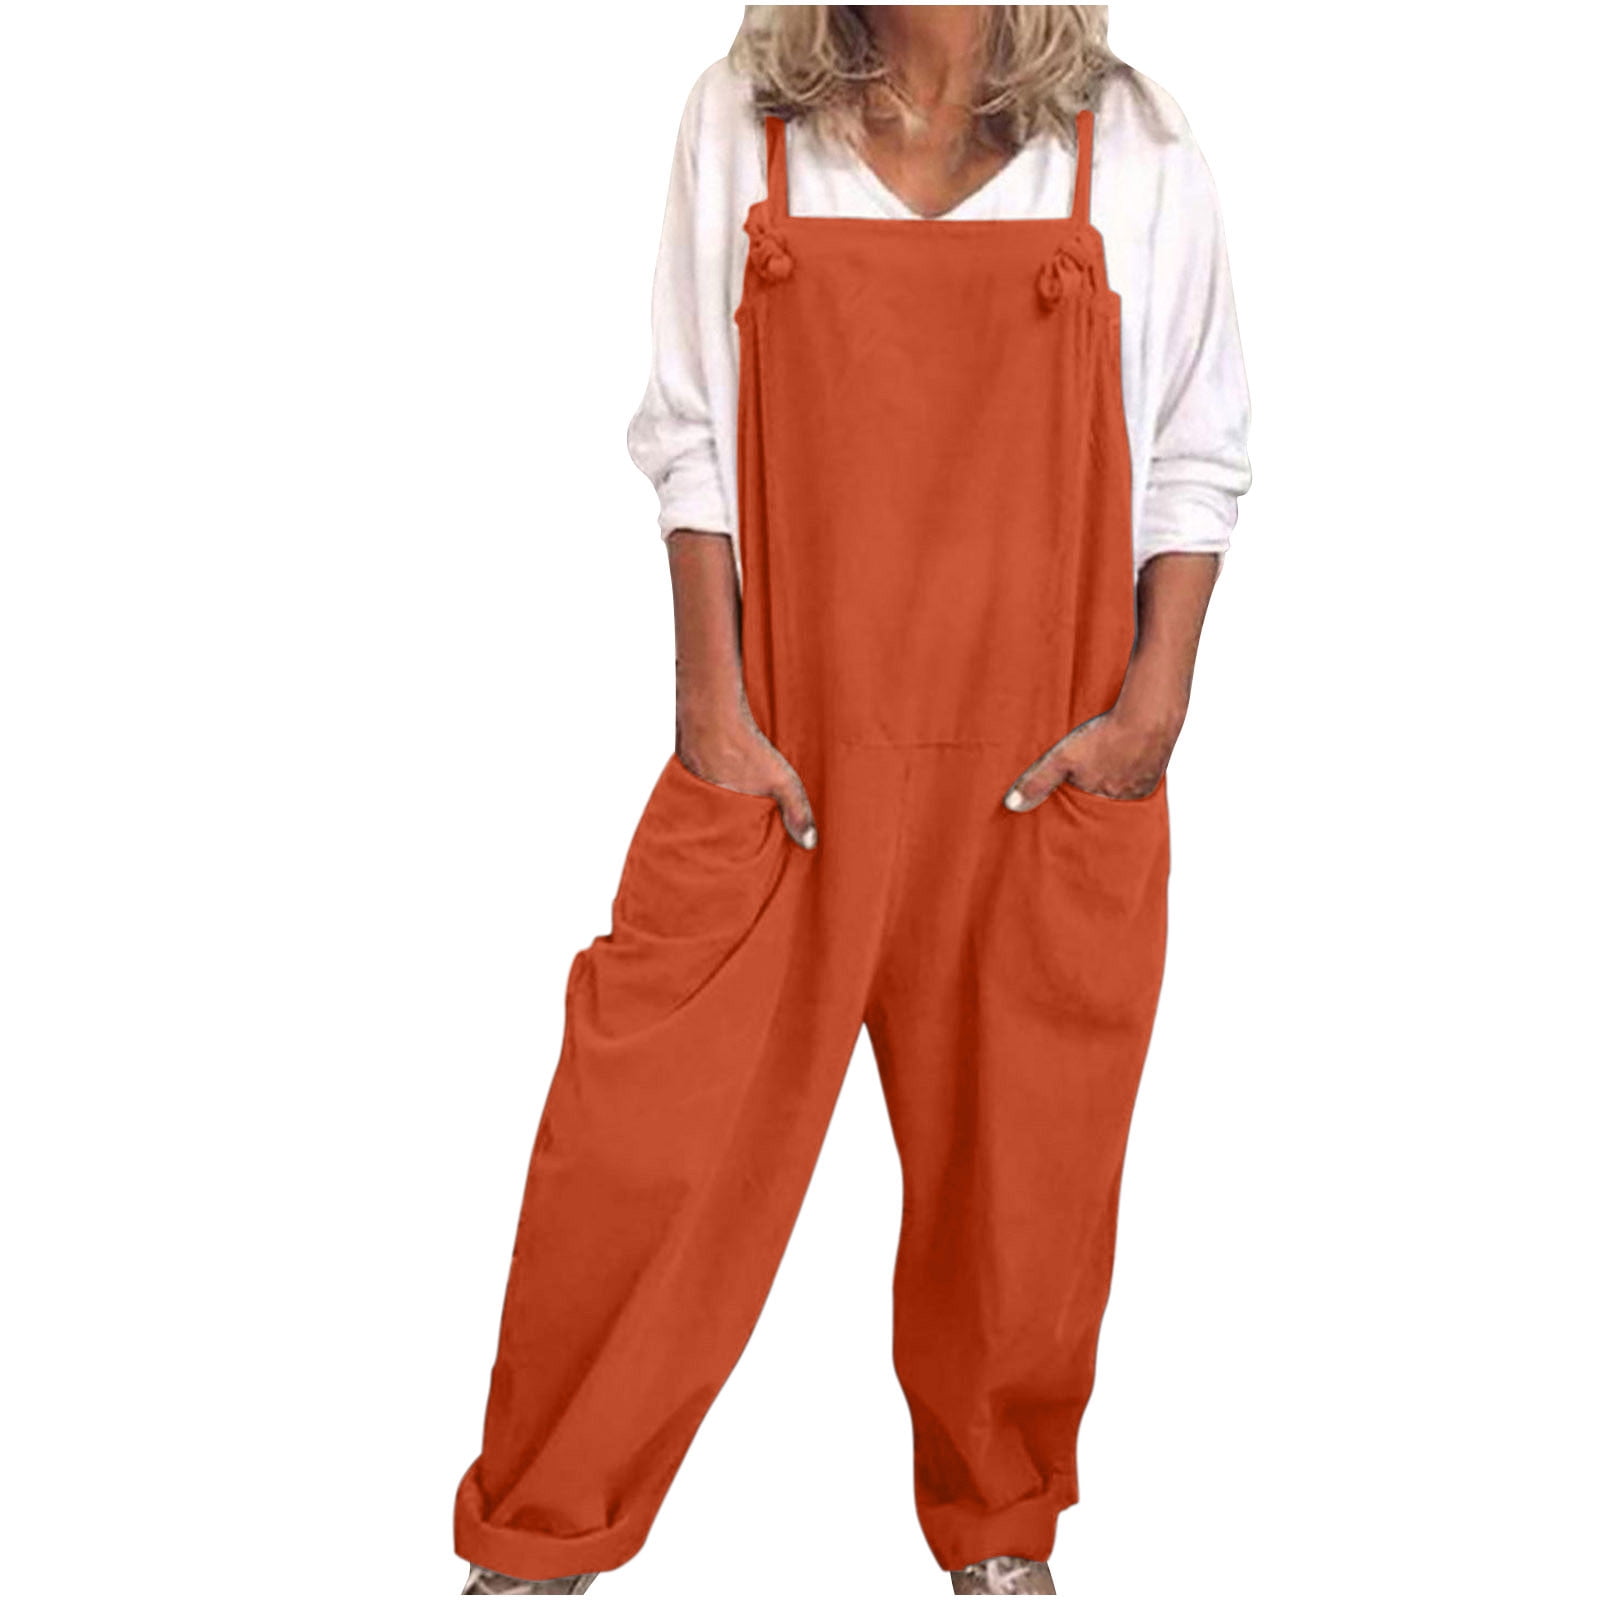 Womens Jumpsuits Dressy Womens Overalls Casual Loose Dungarees Romper Baggy  Playsuit Cotton and Linen Jumpsuit Clearance Orange 3XL 